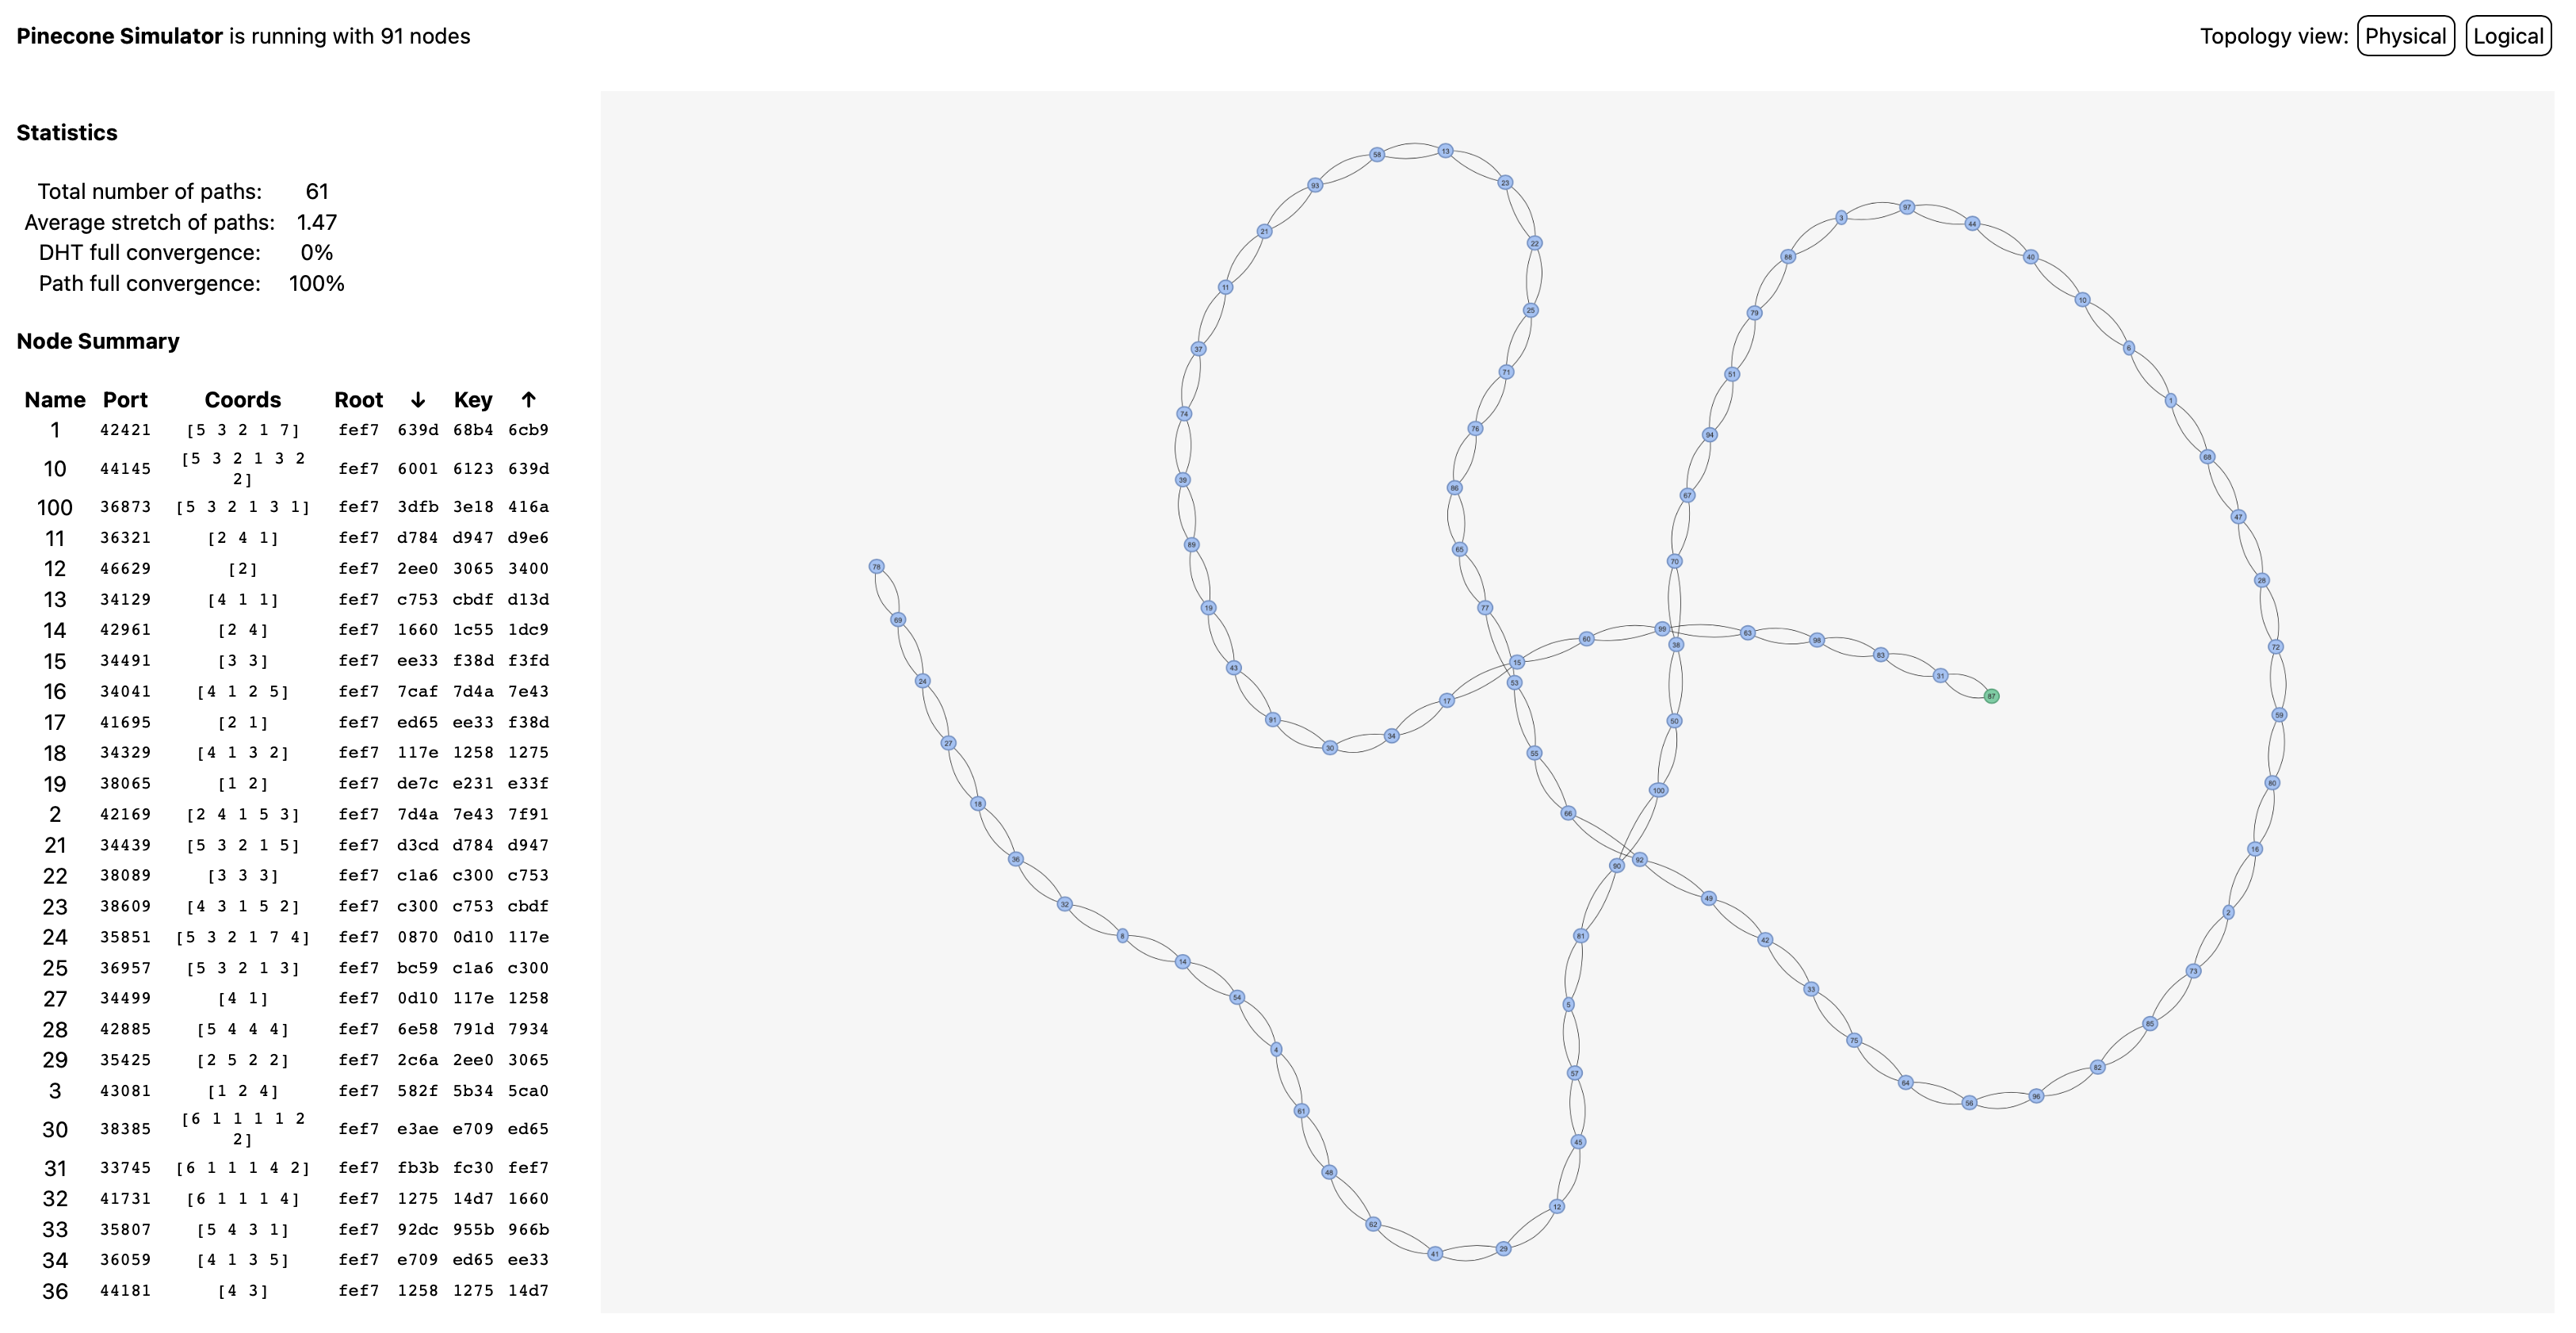 Pinecone simulator showing line/snake logical network topology